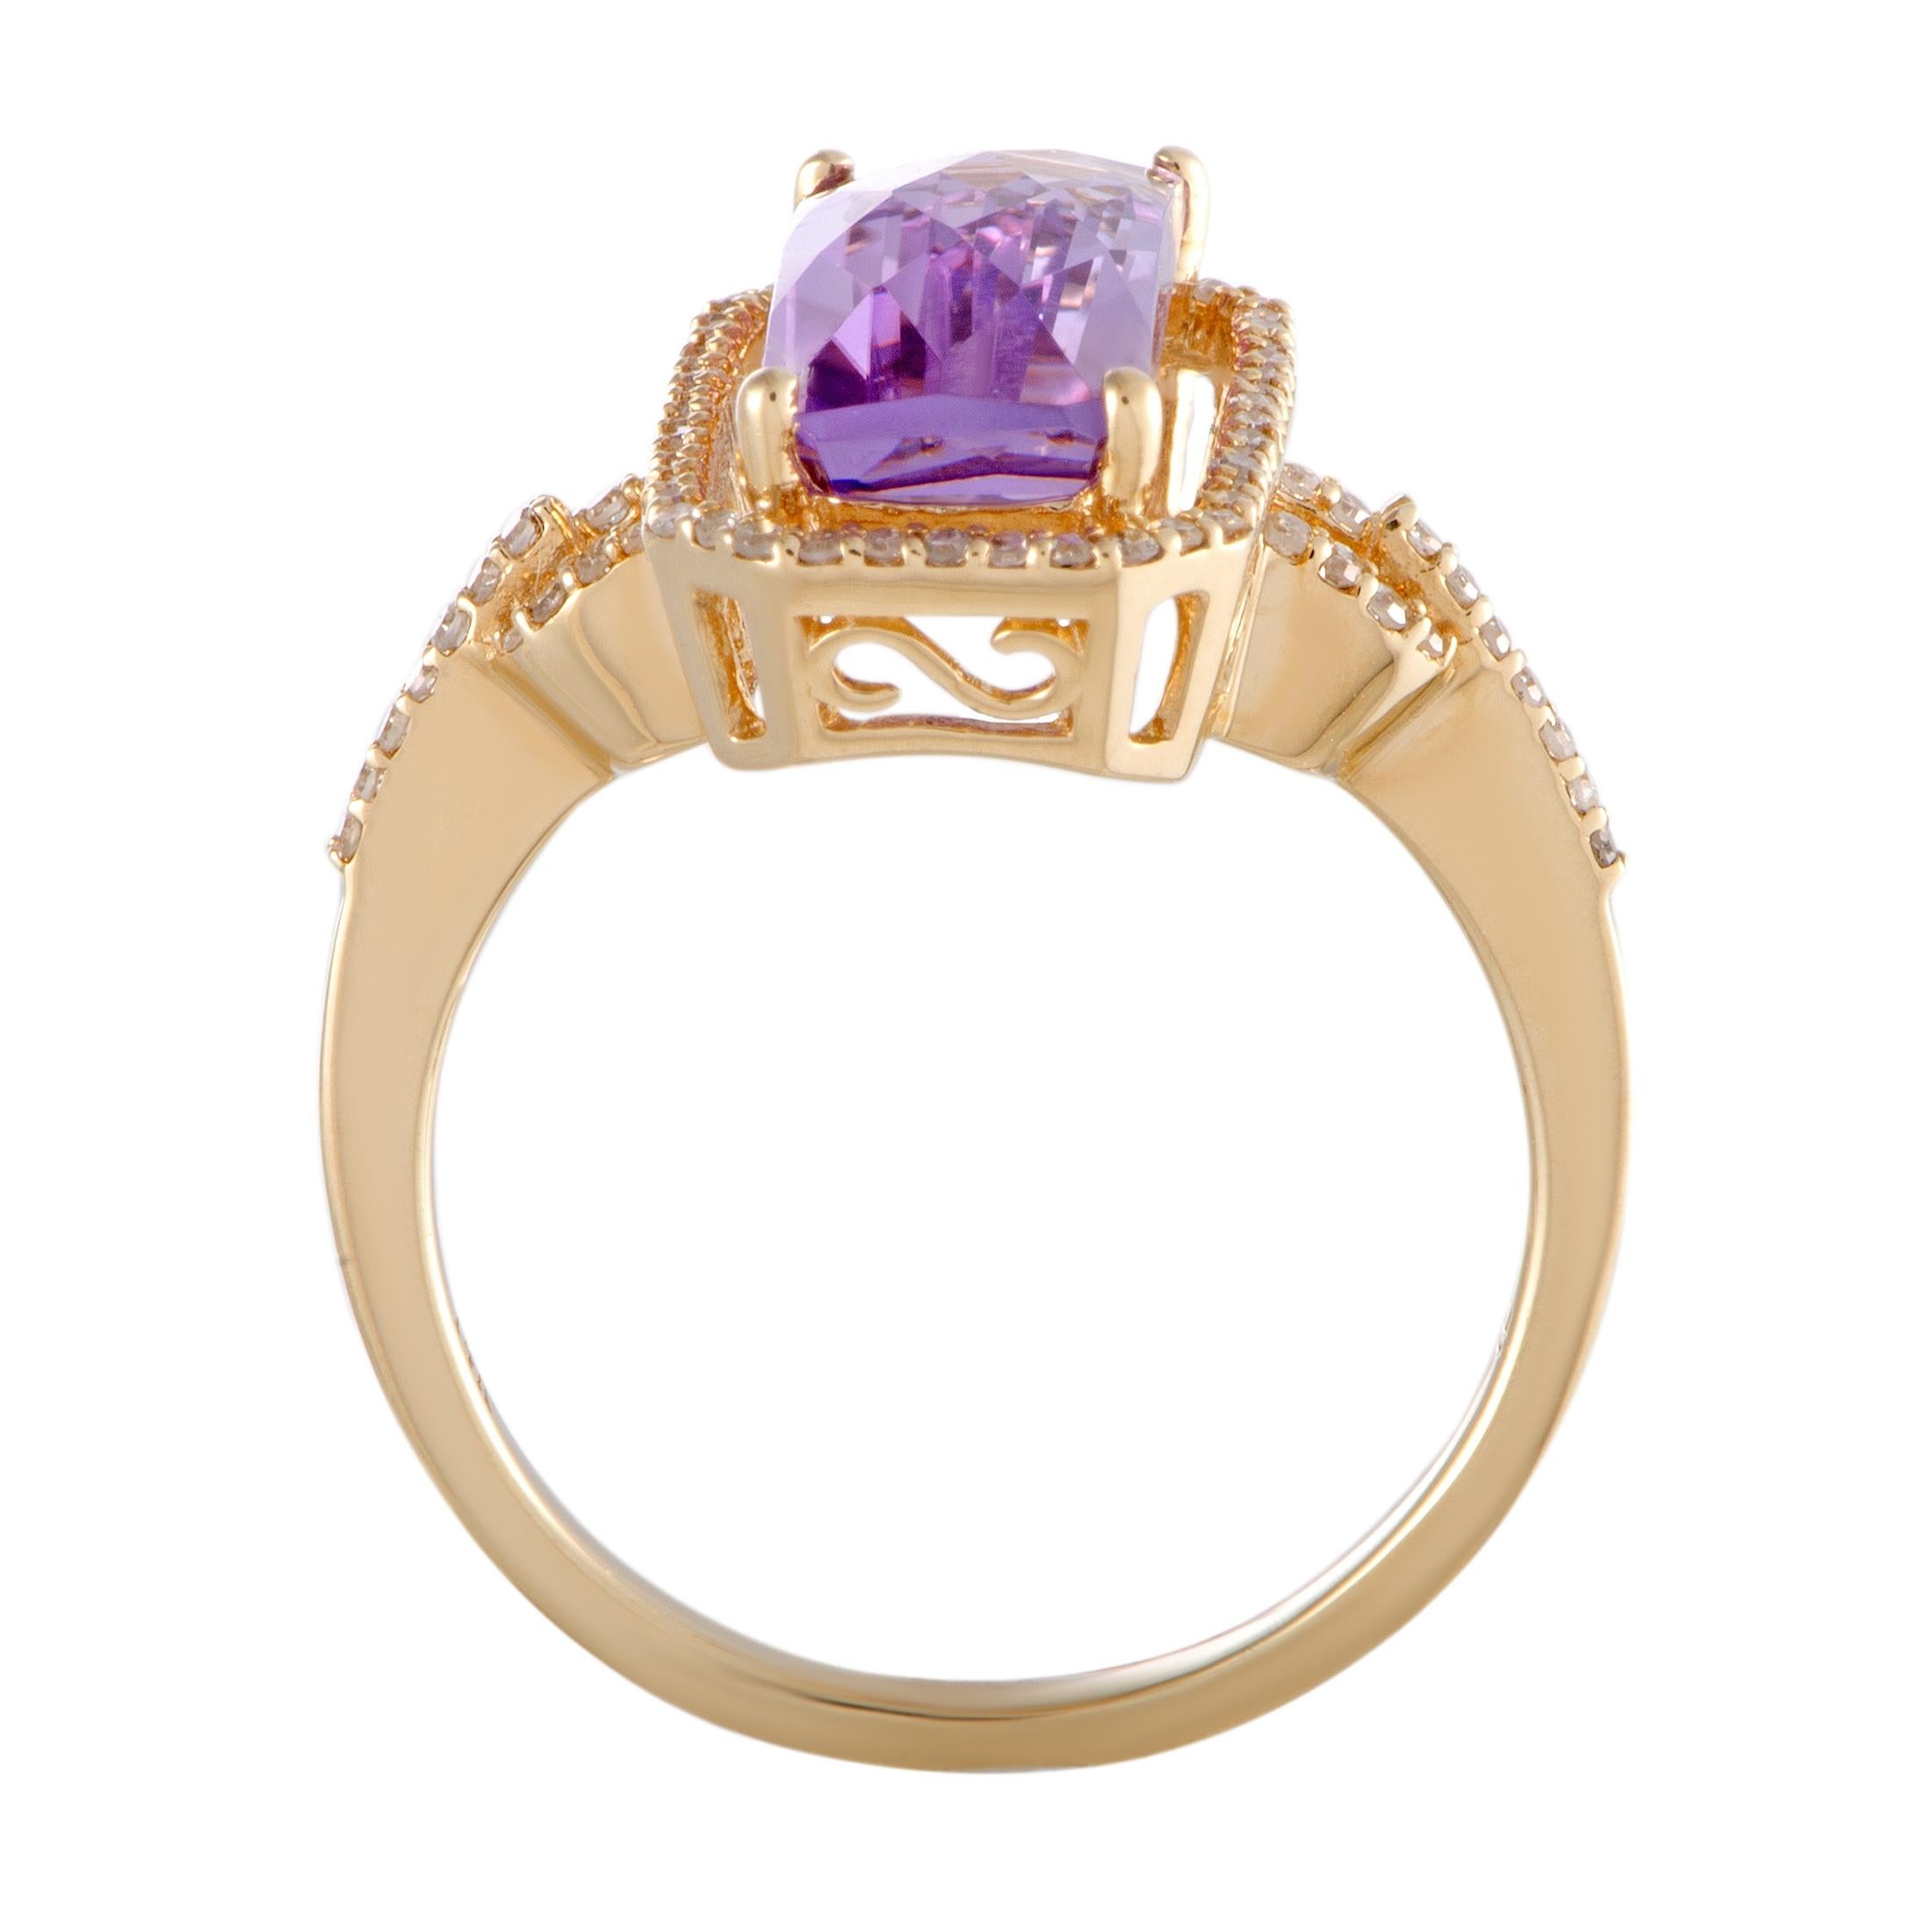 Classy refinement meets timeless elegance in this splendid ring that offers an exceptionally prestigious appearance with its stylish design and luxurious décor. The ring is expertly made of radiant 14K yellow gold and it weighs 4.3 grams. The